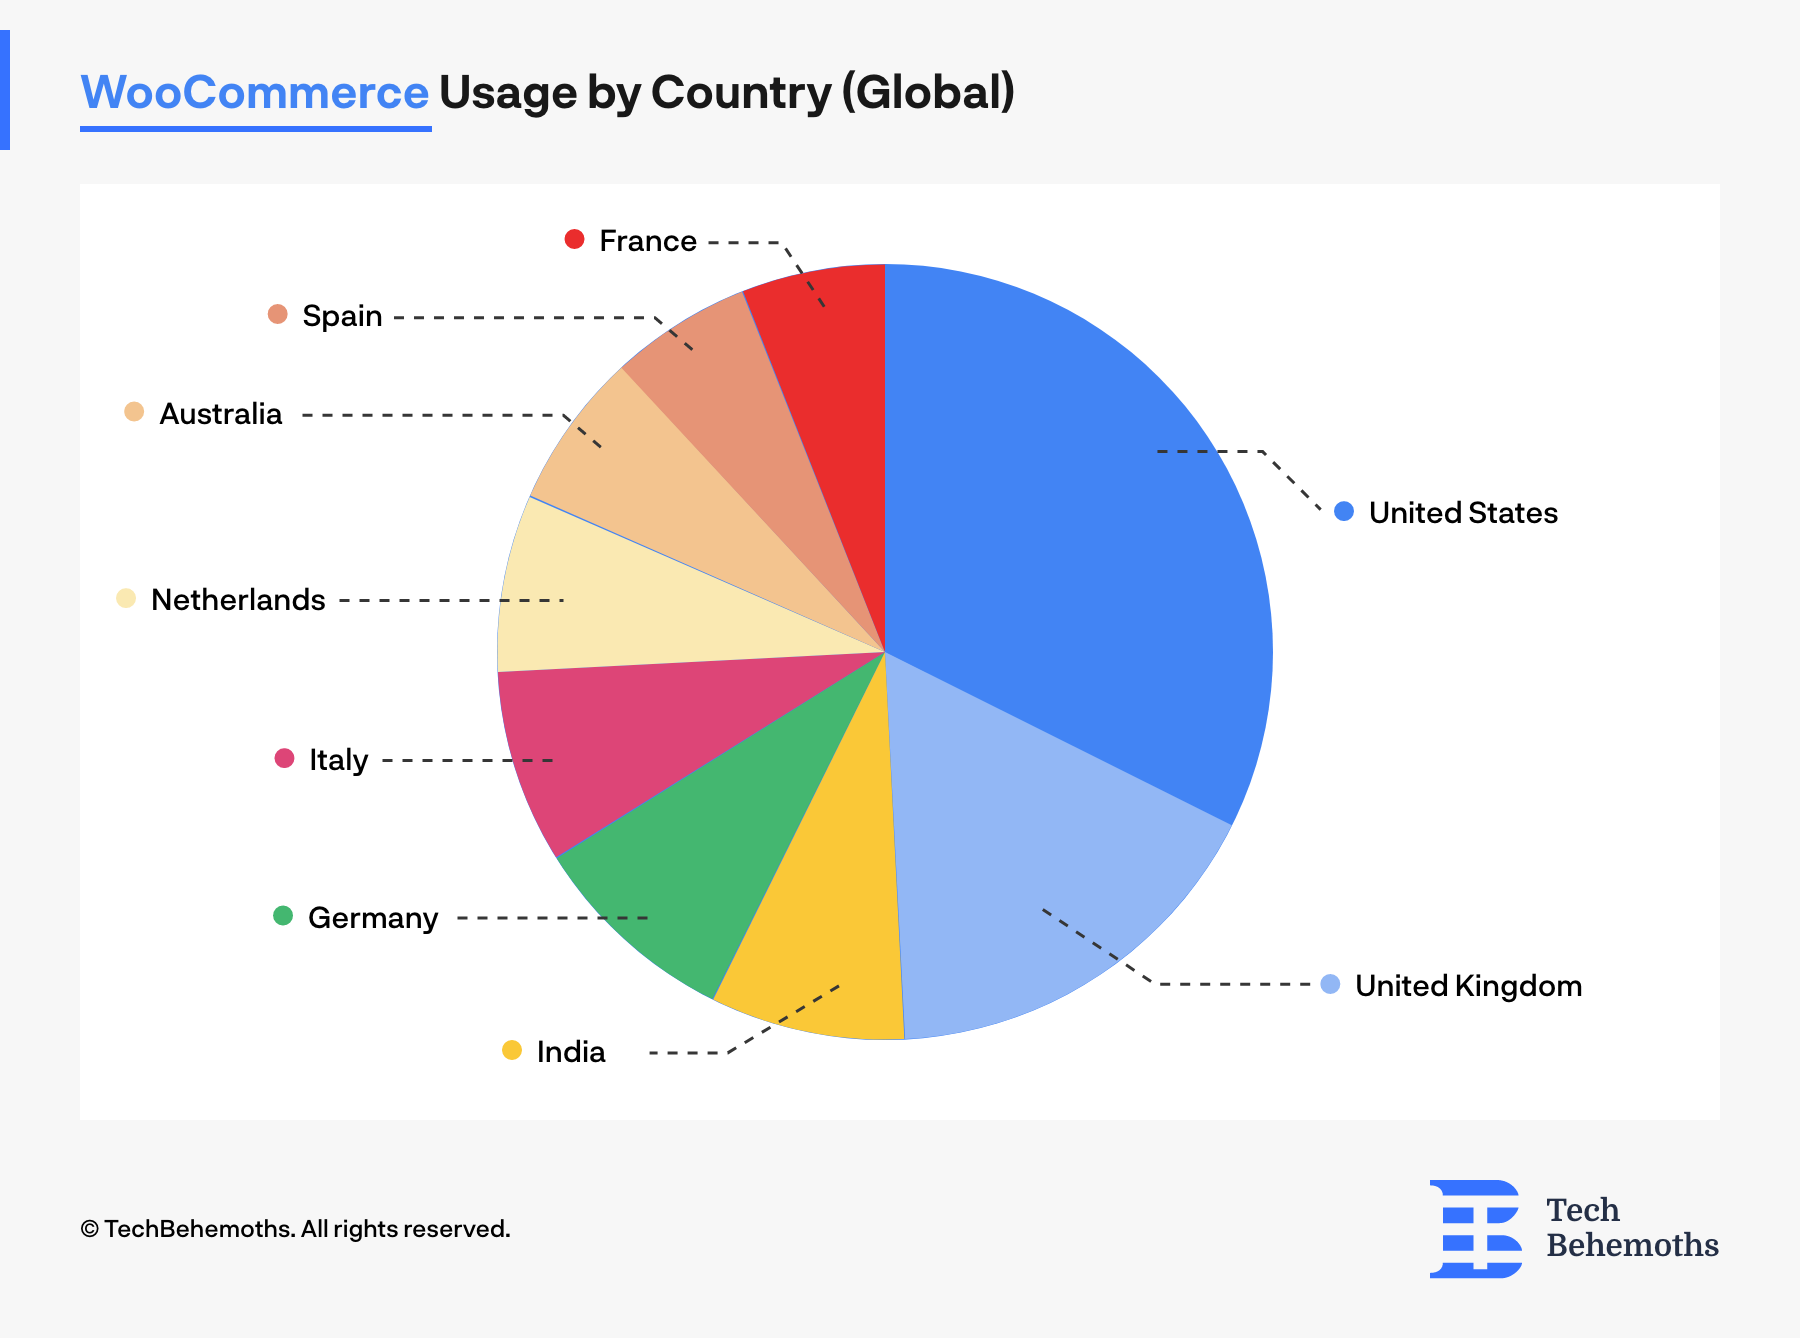 WooCommerce usage by country in percentage